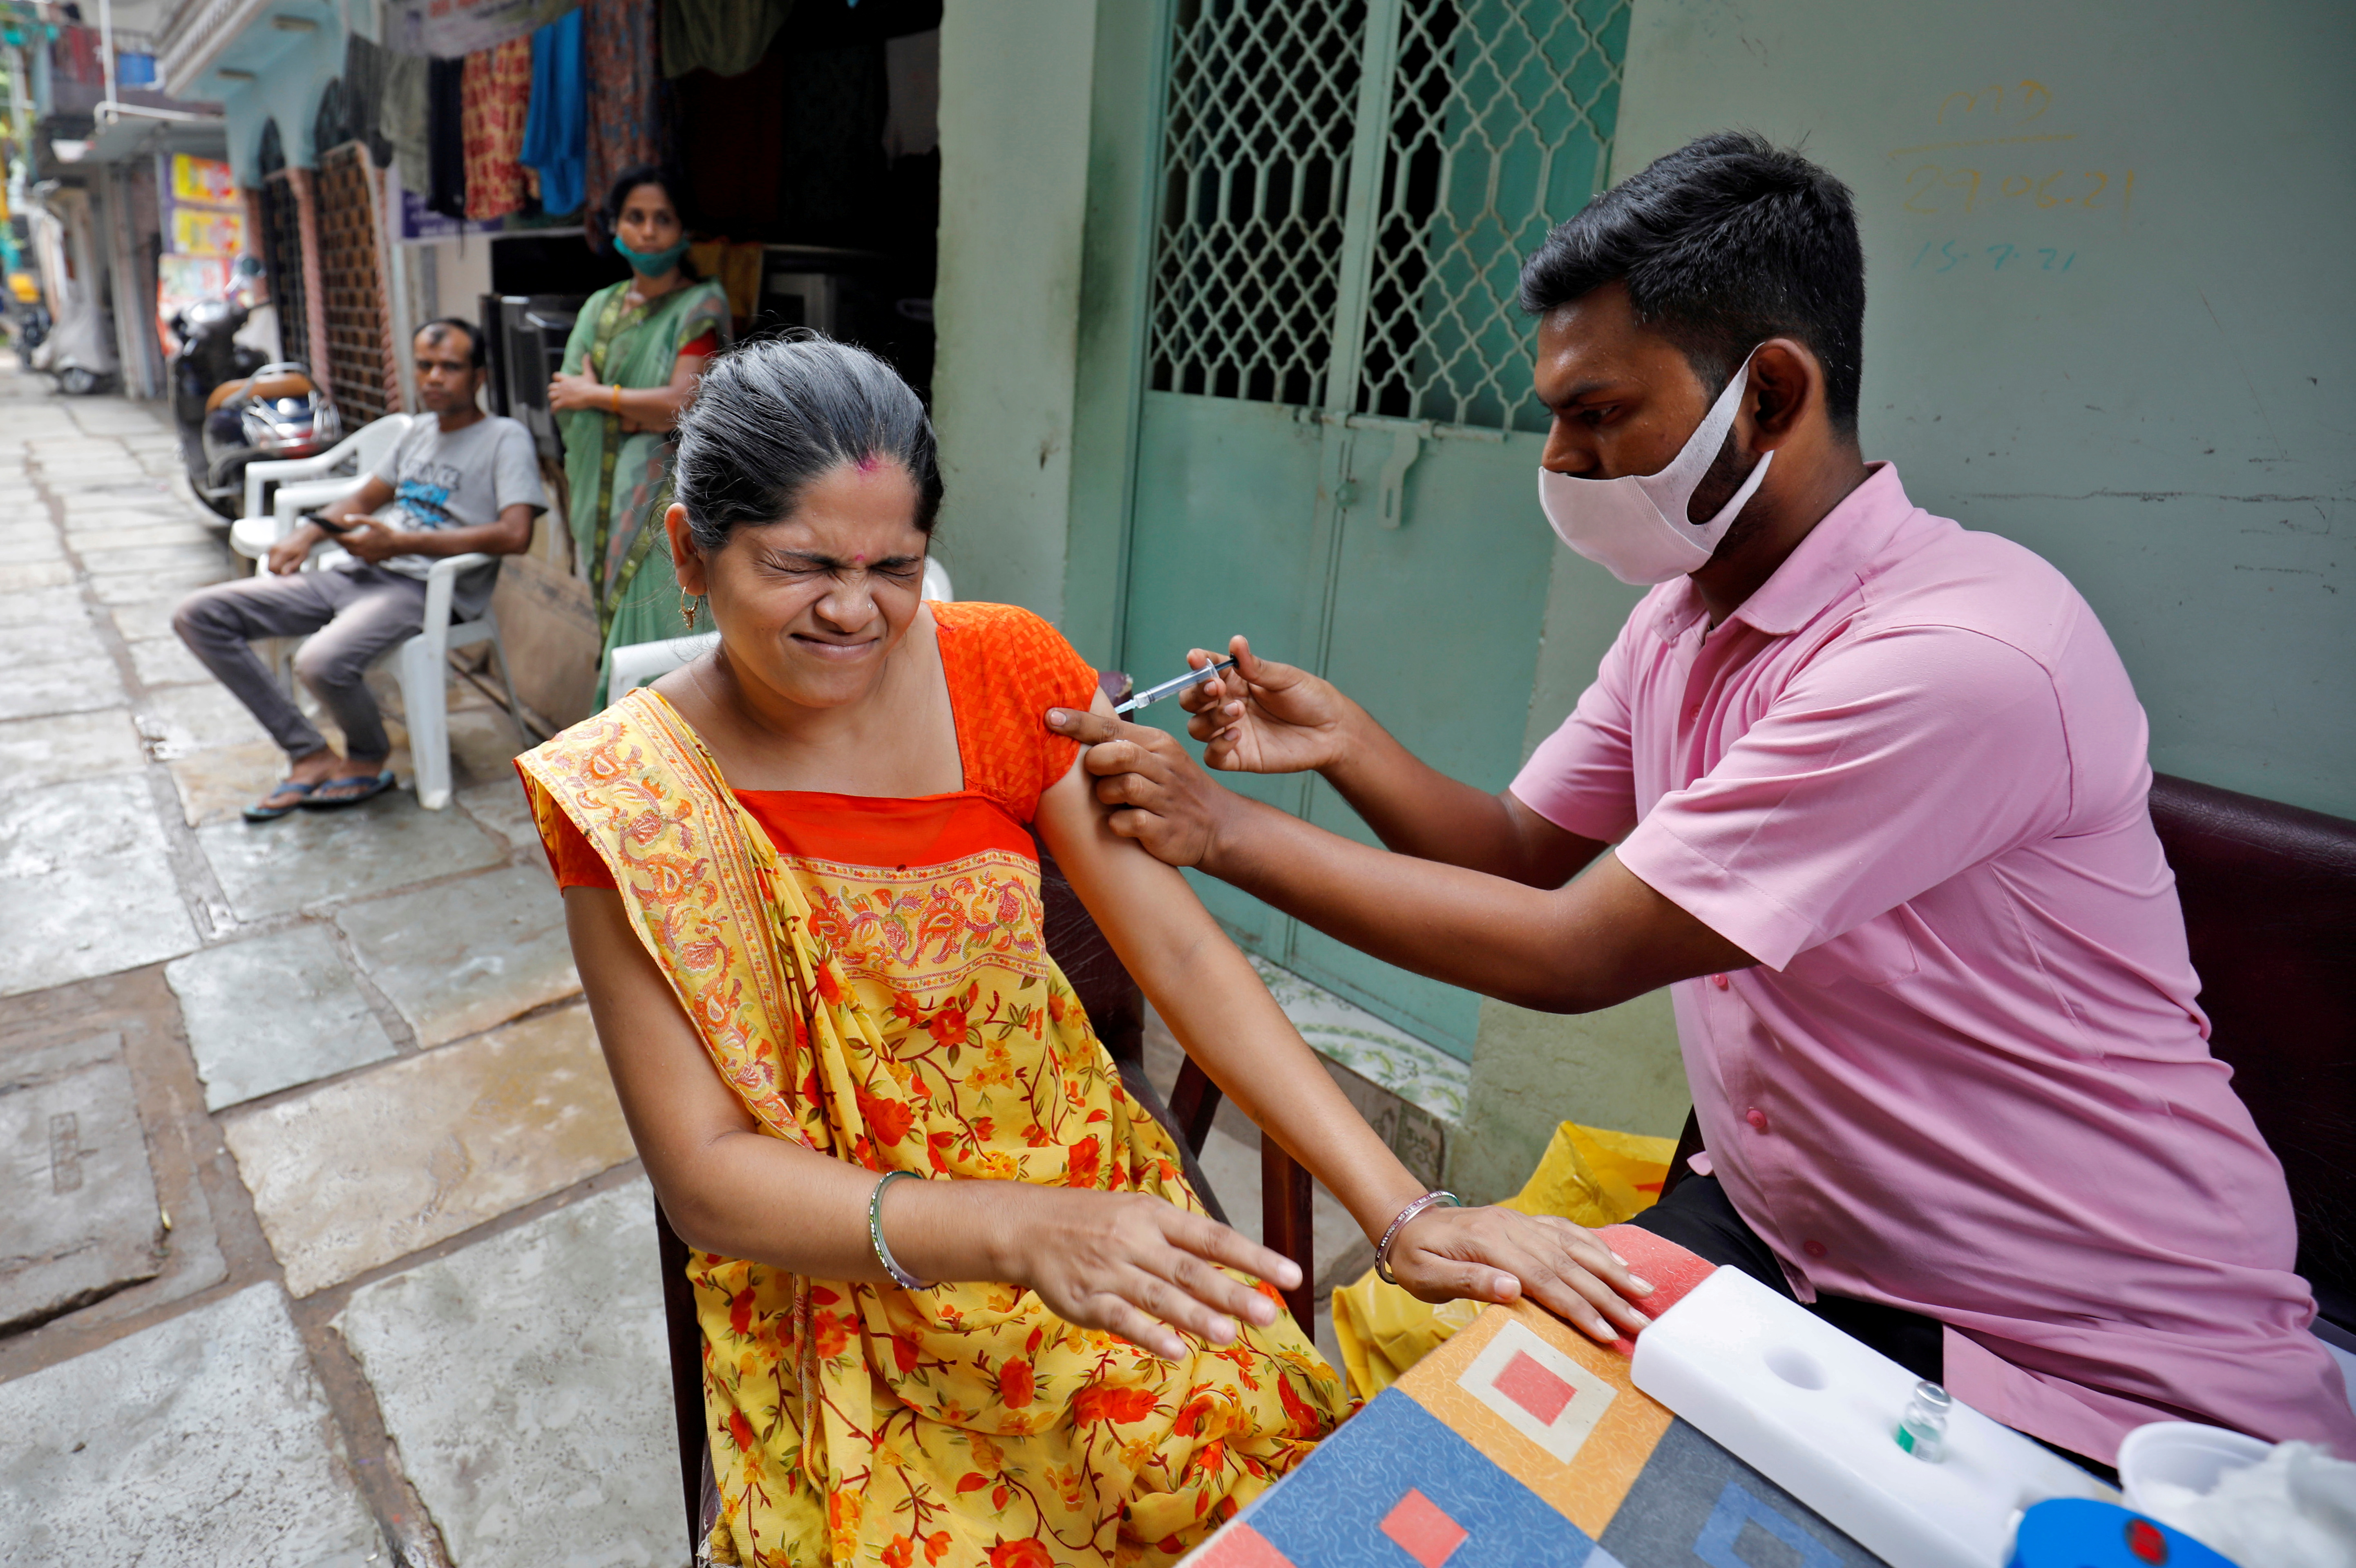 Woman reacts as she receives a dose of COVISHIELD vaccine in an alley at a slum area, in Ahmedabad